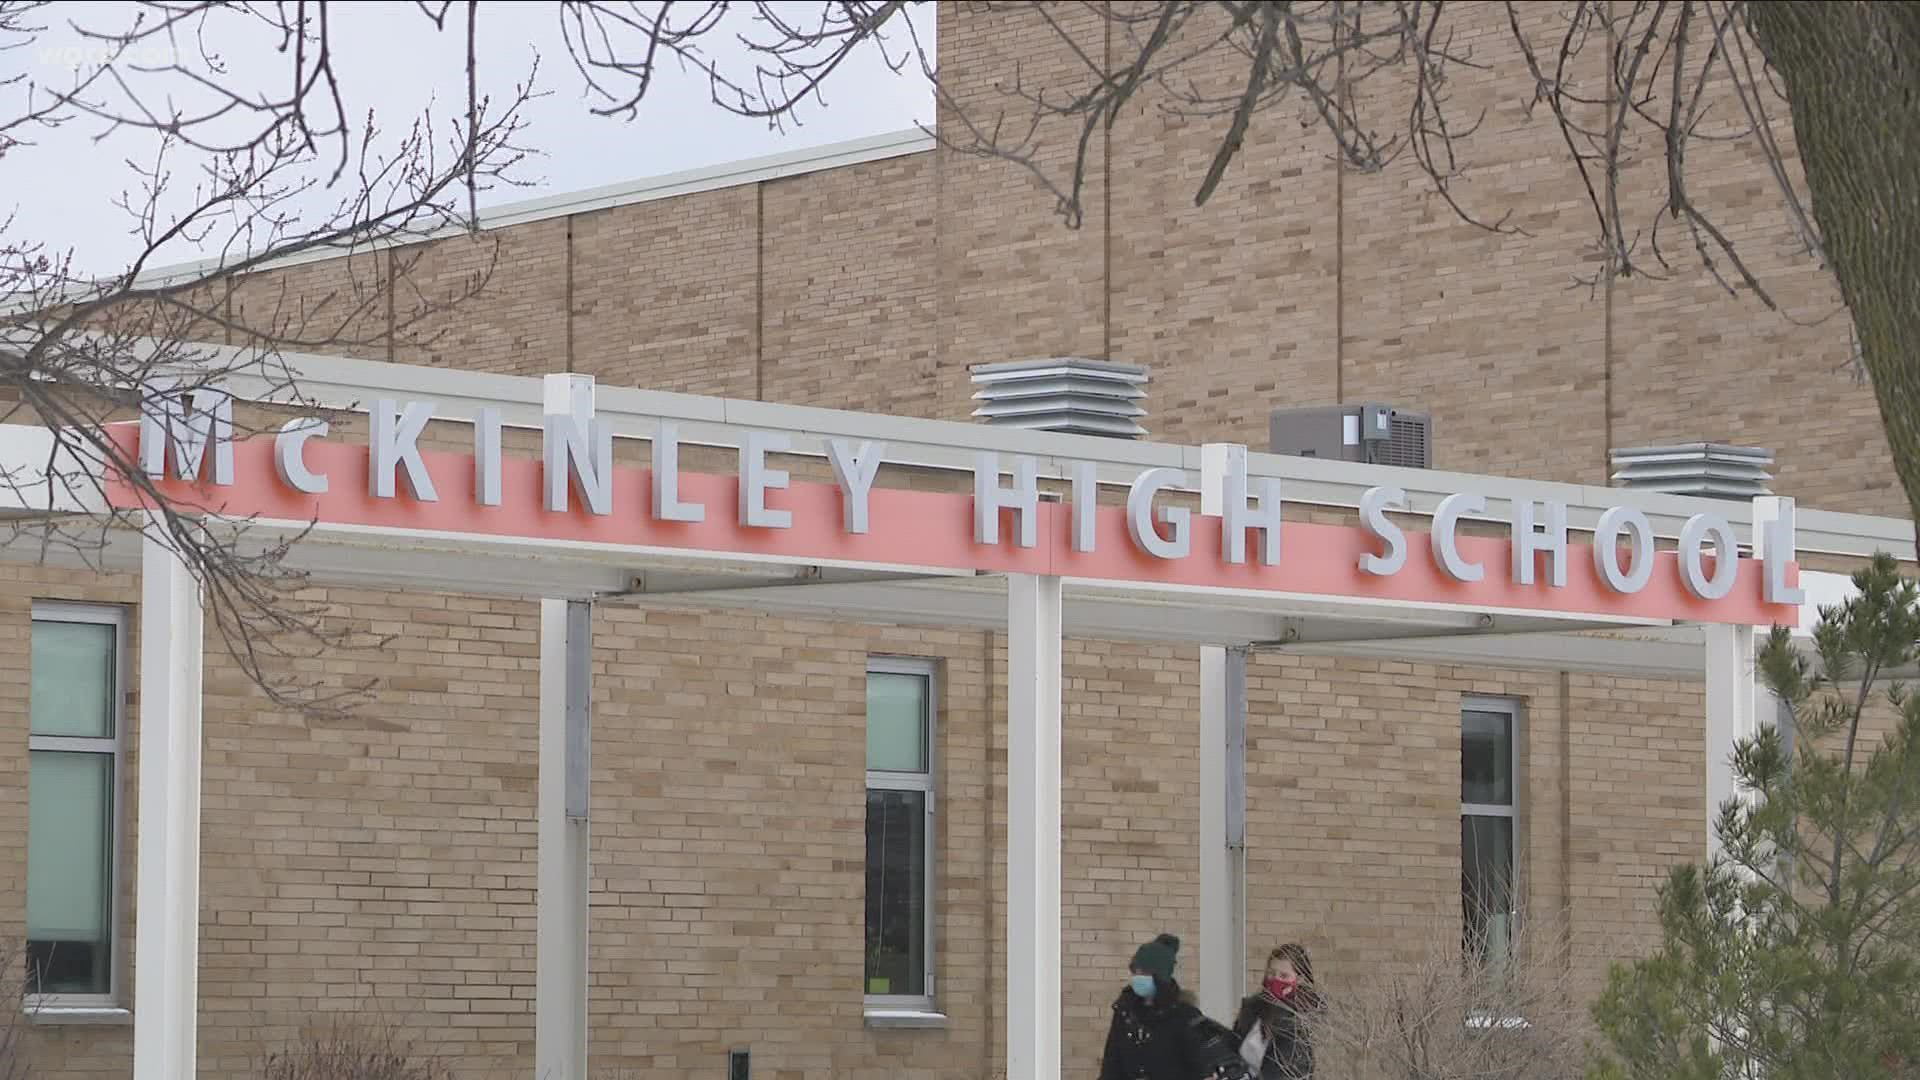 Resetting the climate and culture at McKinley High School. That was the focus of a press conference Saturday at the school.